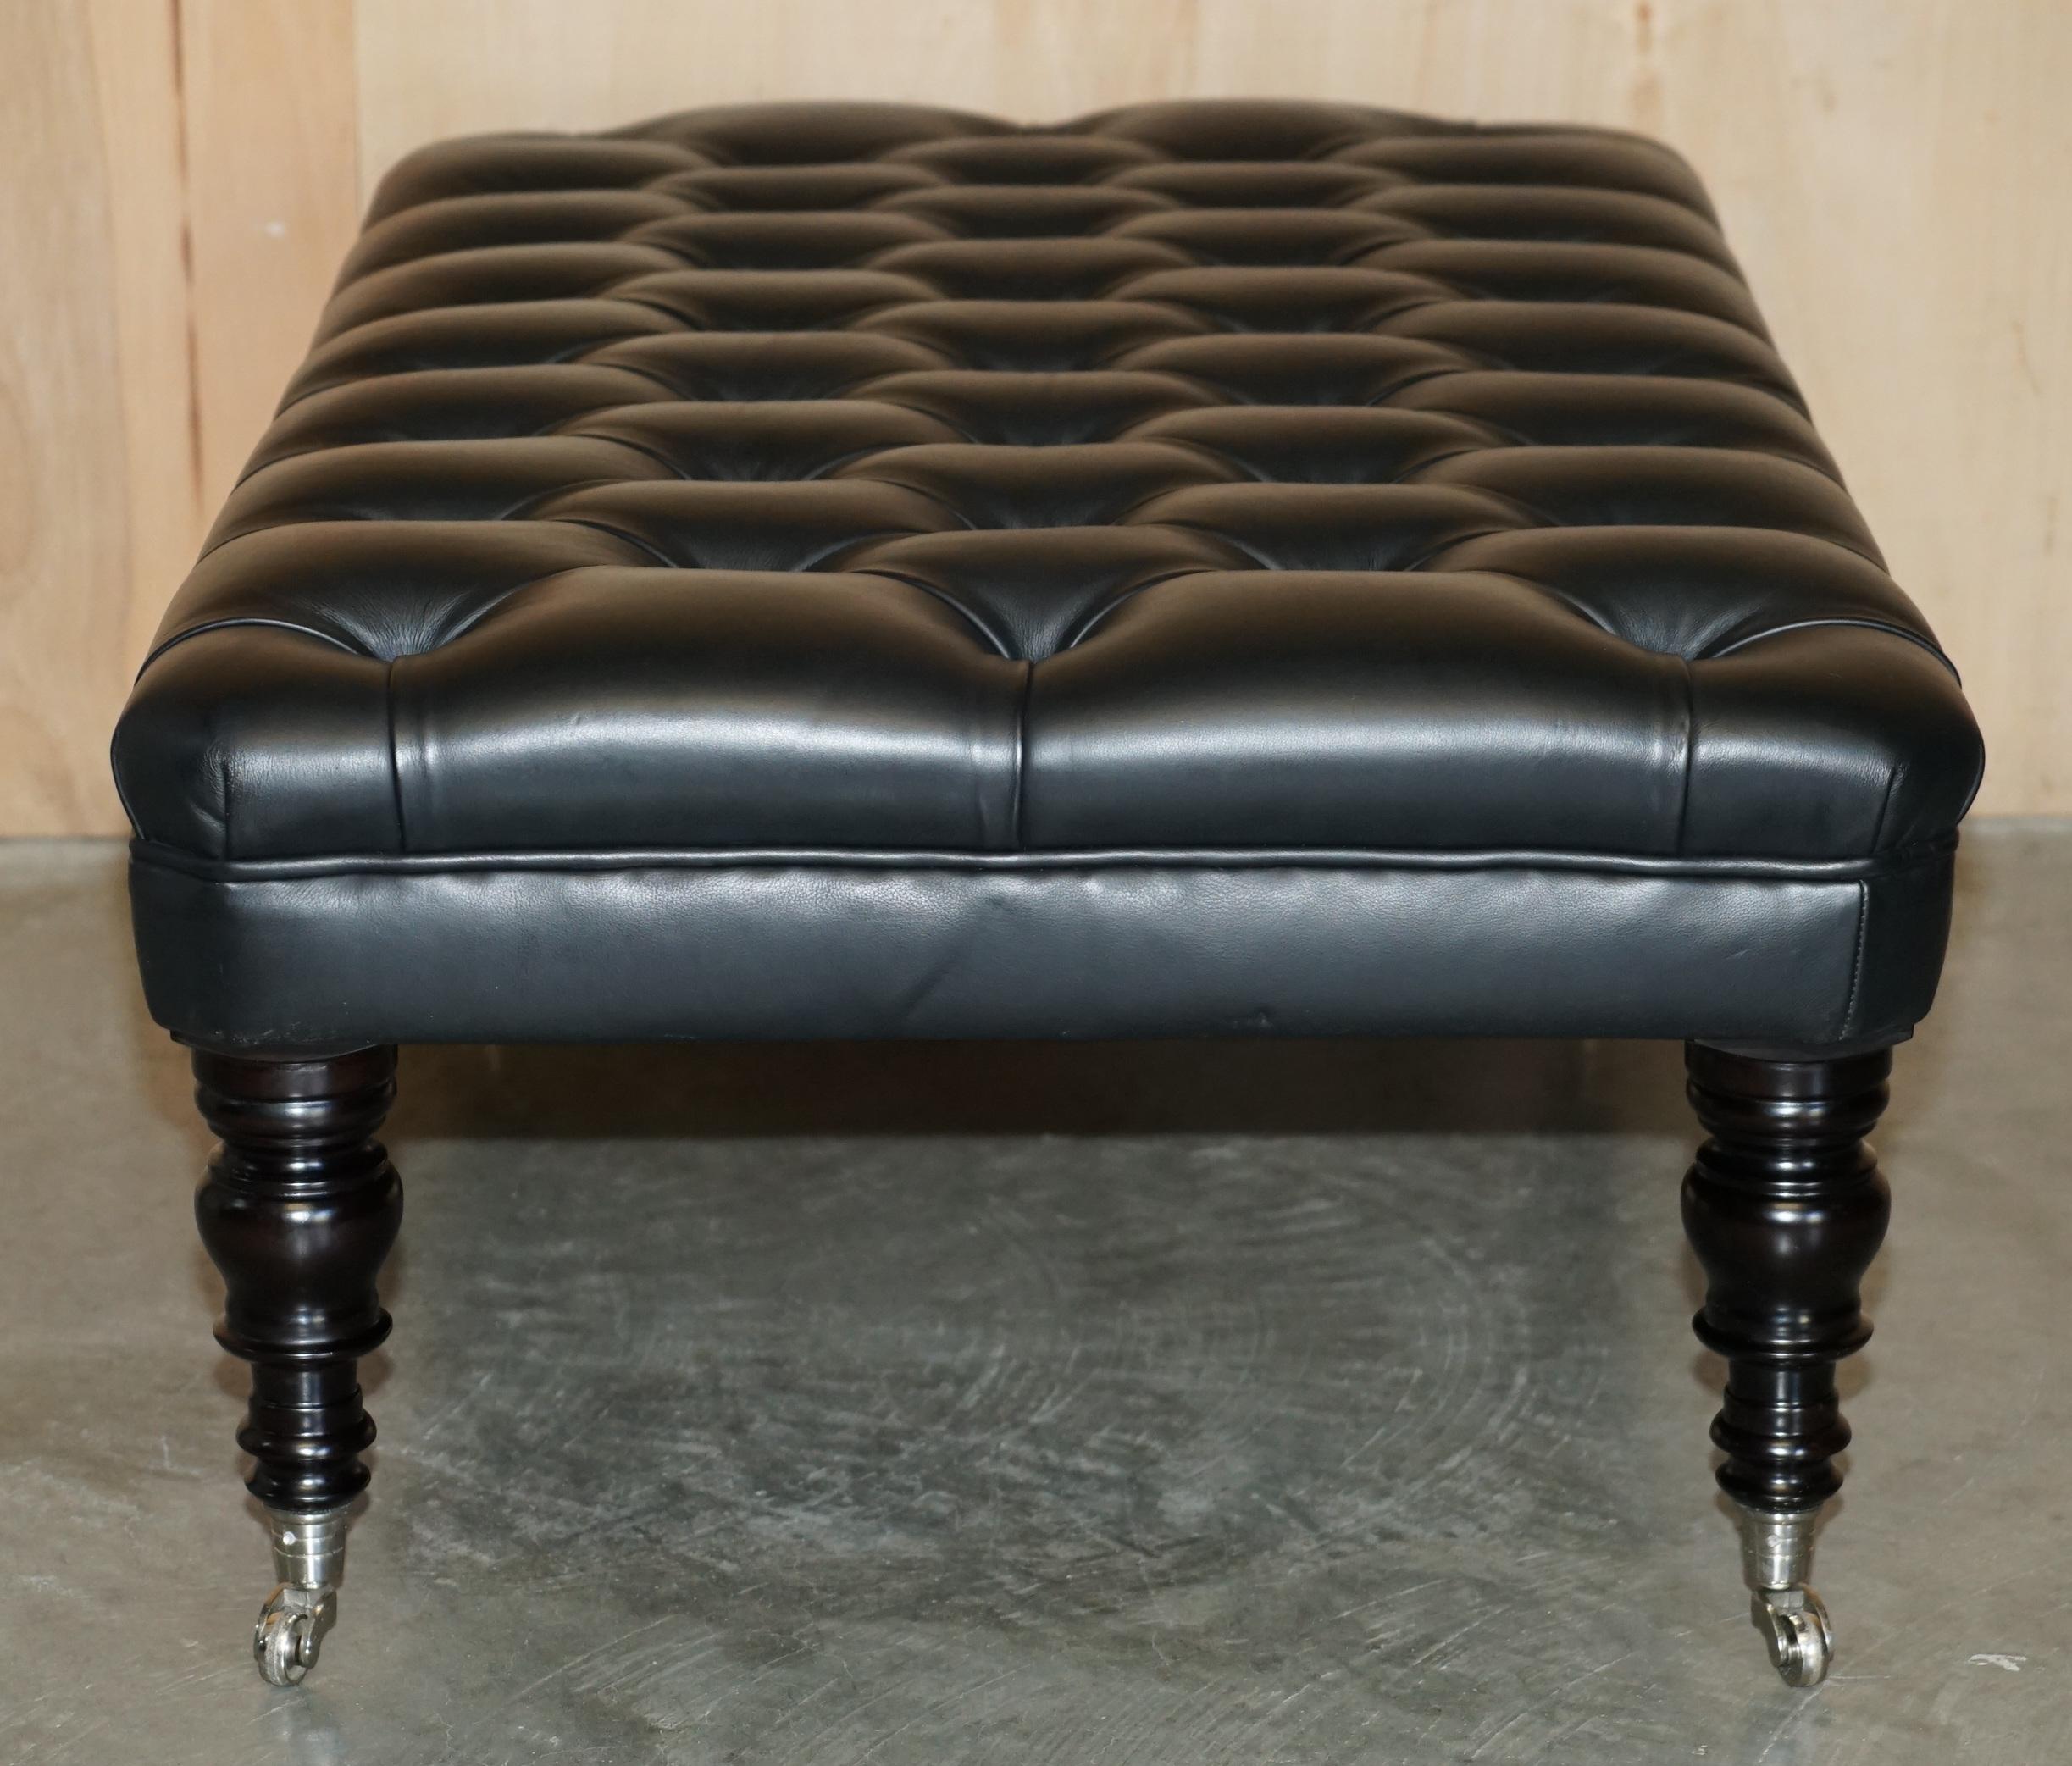 1 von 2 GEORGE SMITH EXTRA LARGE CHESTERFiELD BLACK LEATHER TUFTED FOOTSTOOLS im Angebot 3